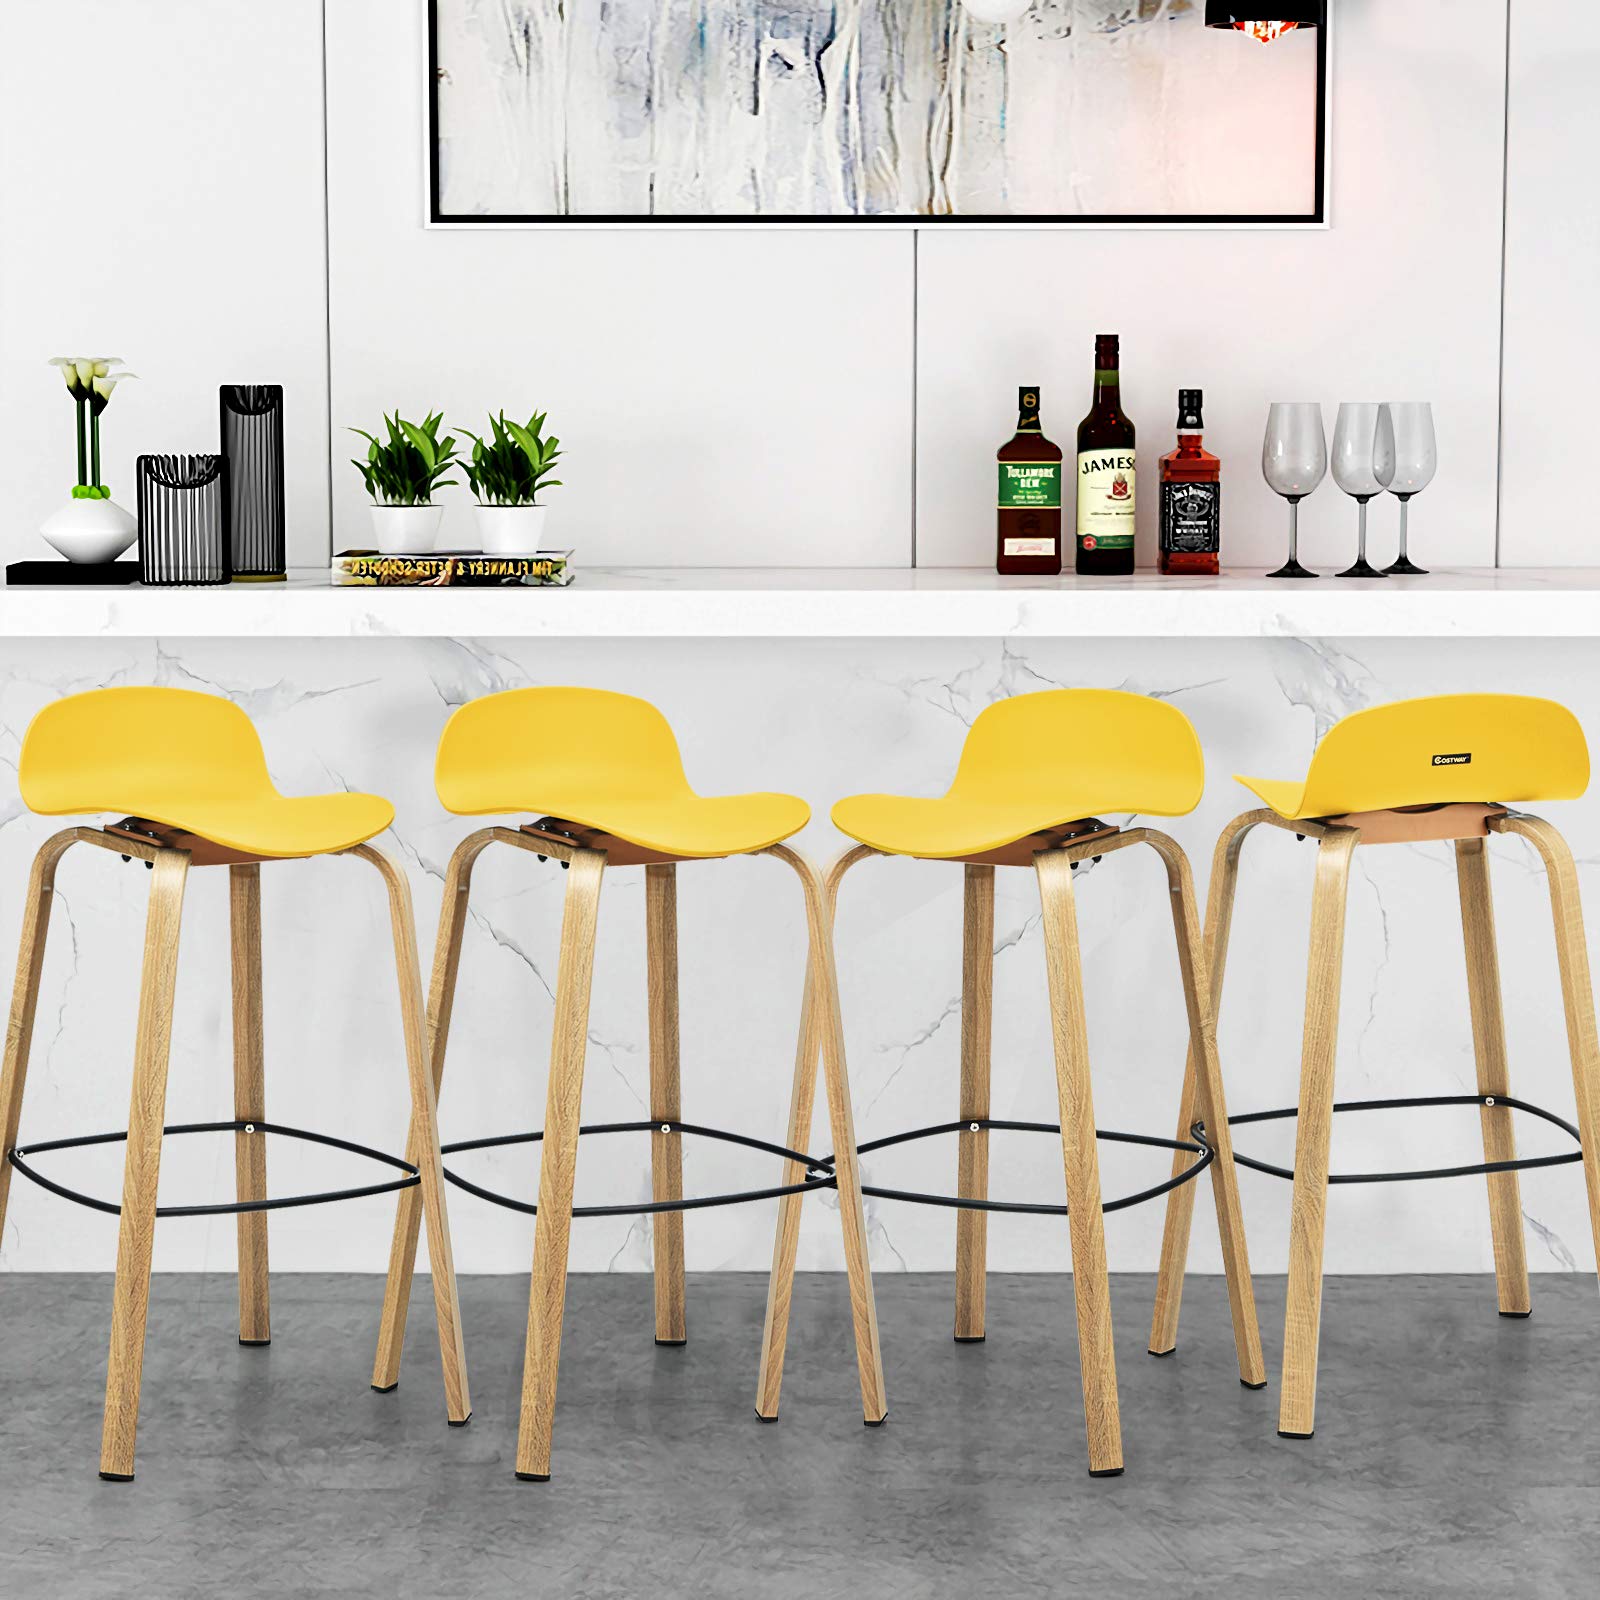 Giantex 30-Inch Modern Minimalist Bar Chairs with Footrest, Low Backrest and Metal Legs, Nordic Style High Stools